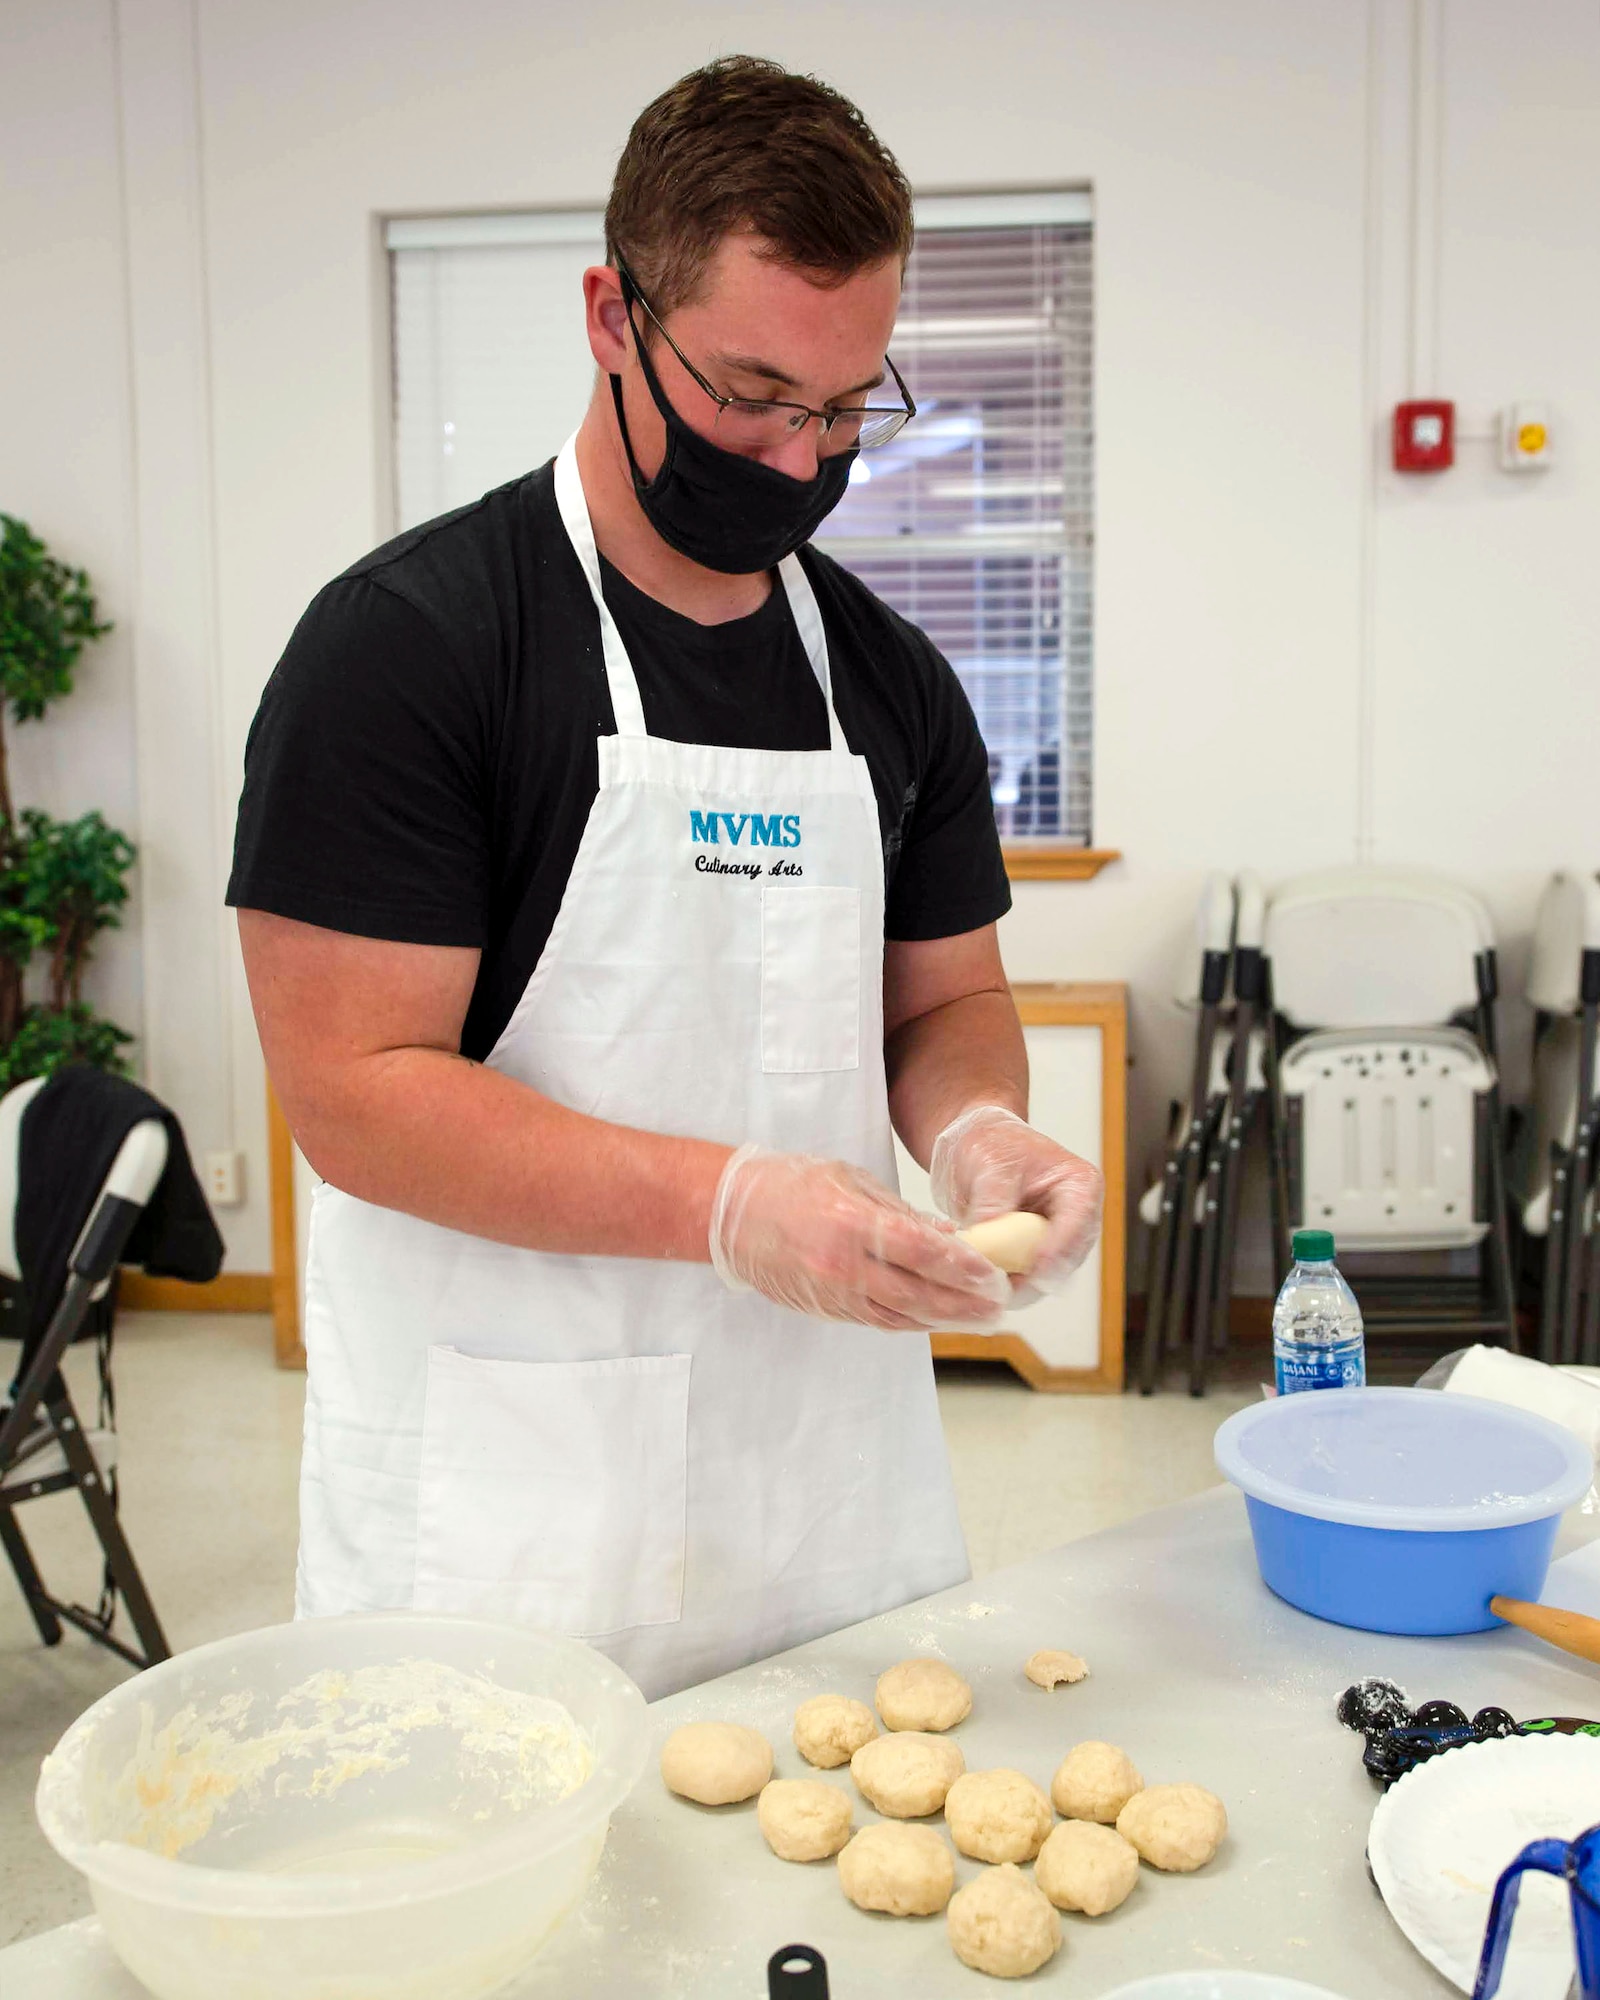 Airman 1st Class Hunter Breaux, 16th Training Squadron student, forms balls of dough to make tortillas during a cooking class, Nov. 7, 2020, on Holloman Air Force Base, New Mexico. With more people spending time in the home due to the COVID-19 pandemic, the class was livestreamed to allow Airmen and their families to participate in a fun activity while being COVID safe. (U.S. Air Force photo by Denise Ottaviano)